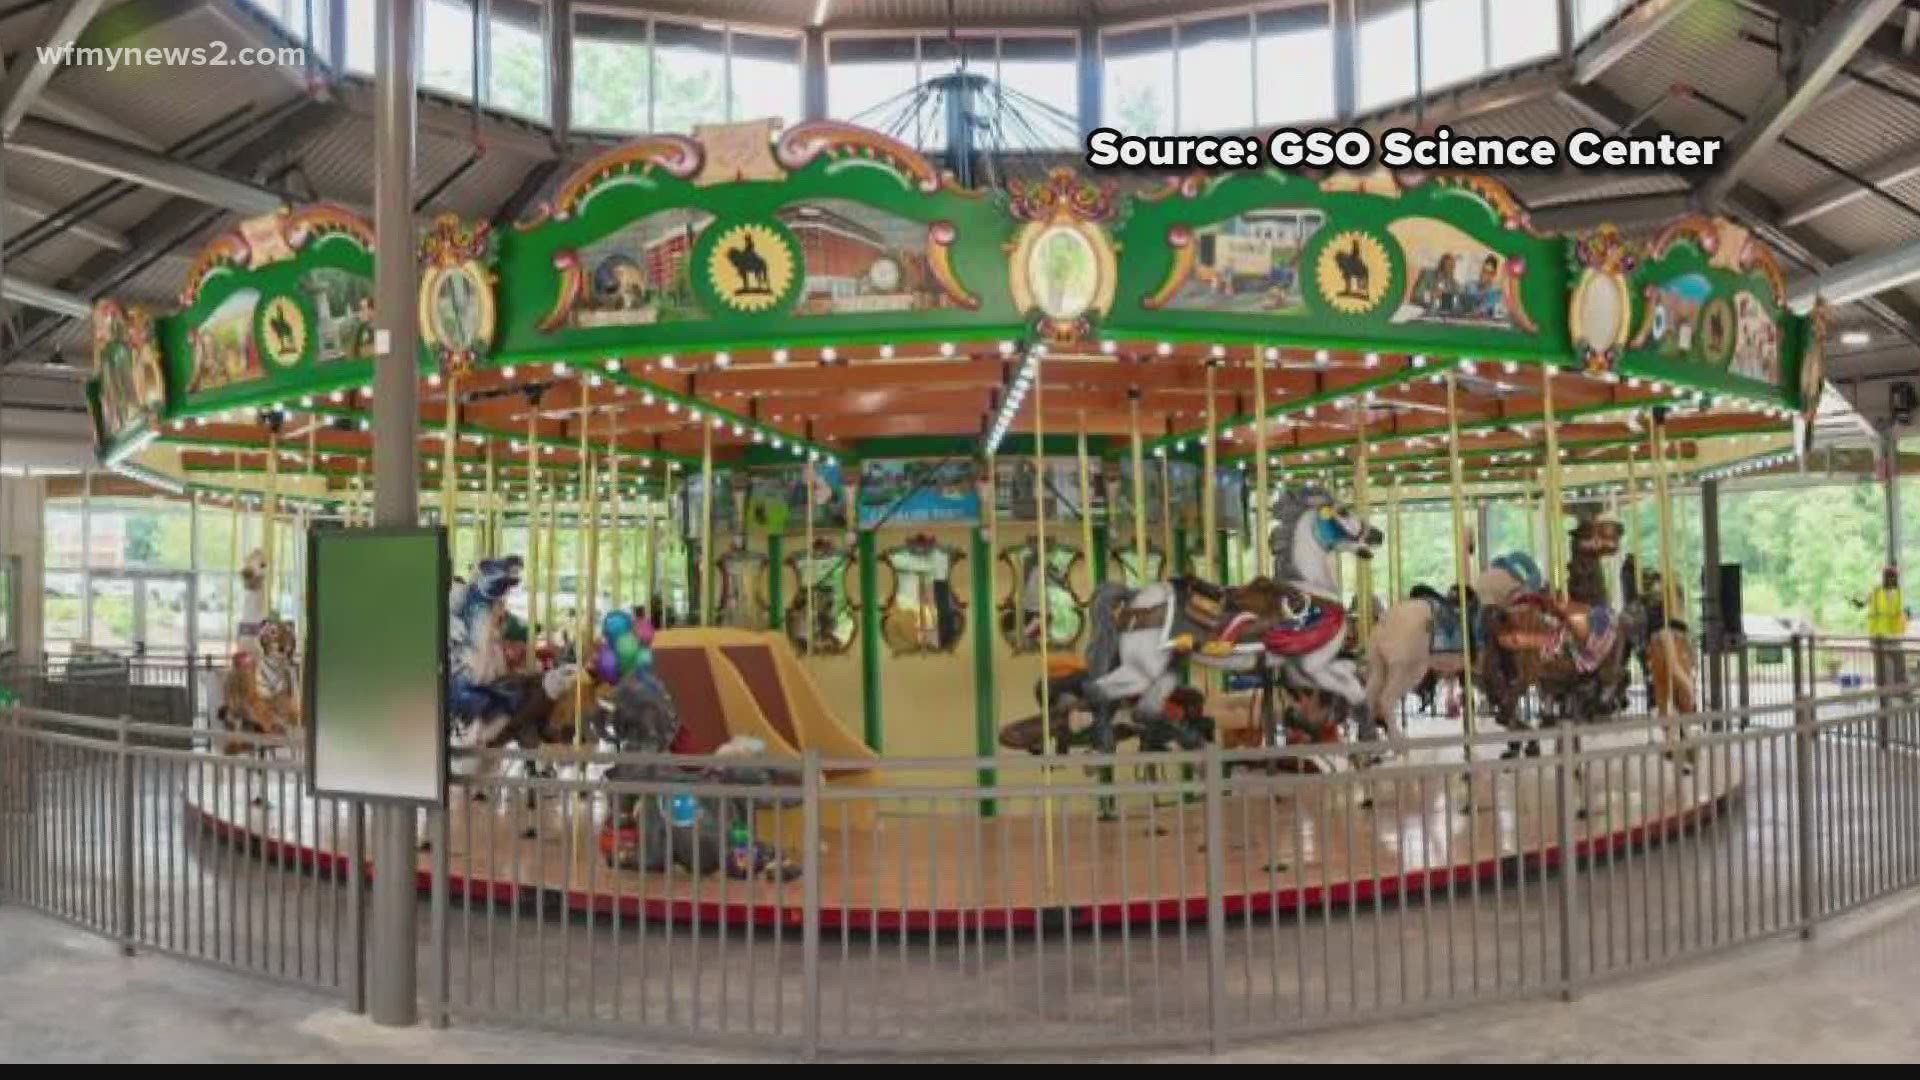 The Greensboro Science Center is making changes to the carousel’s operation because of coronavirus. The carousel opens to the public August 26.